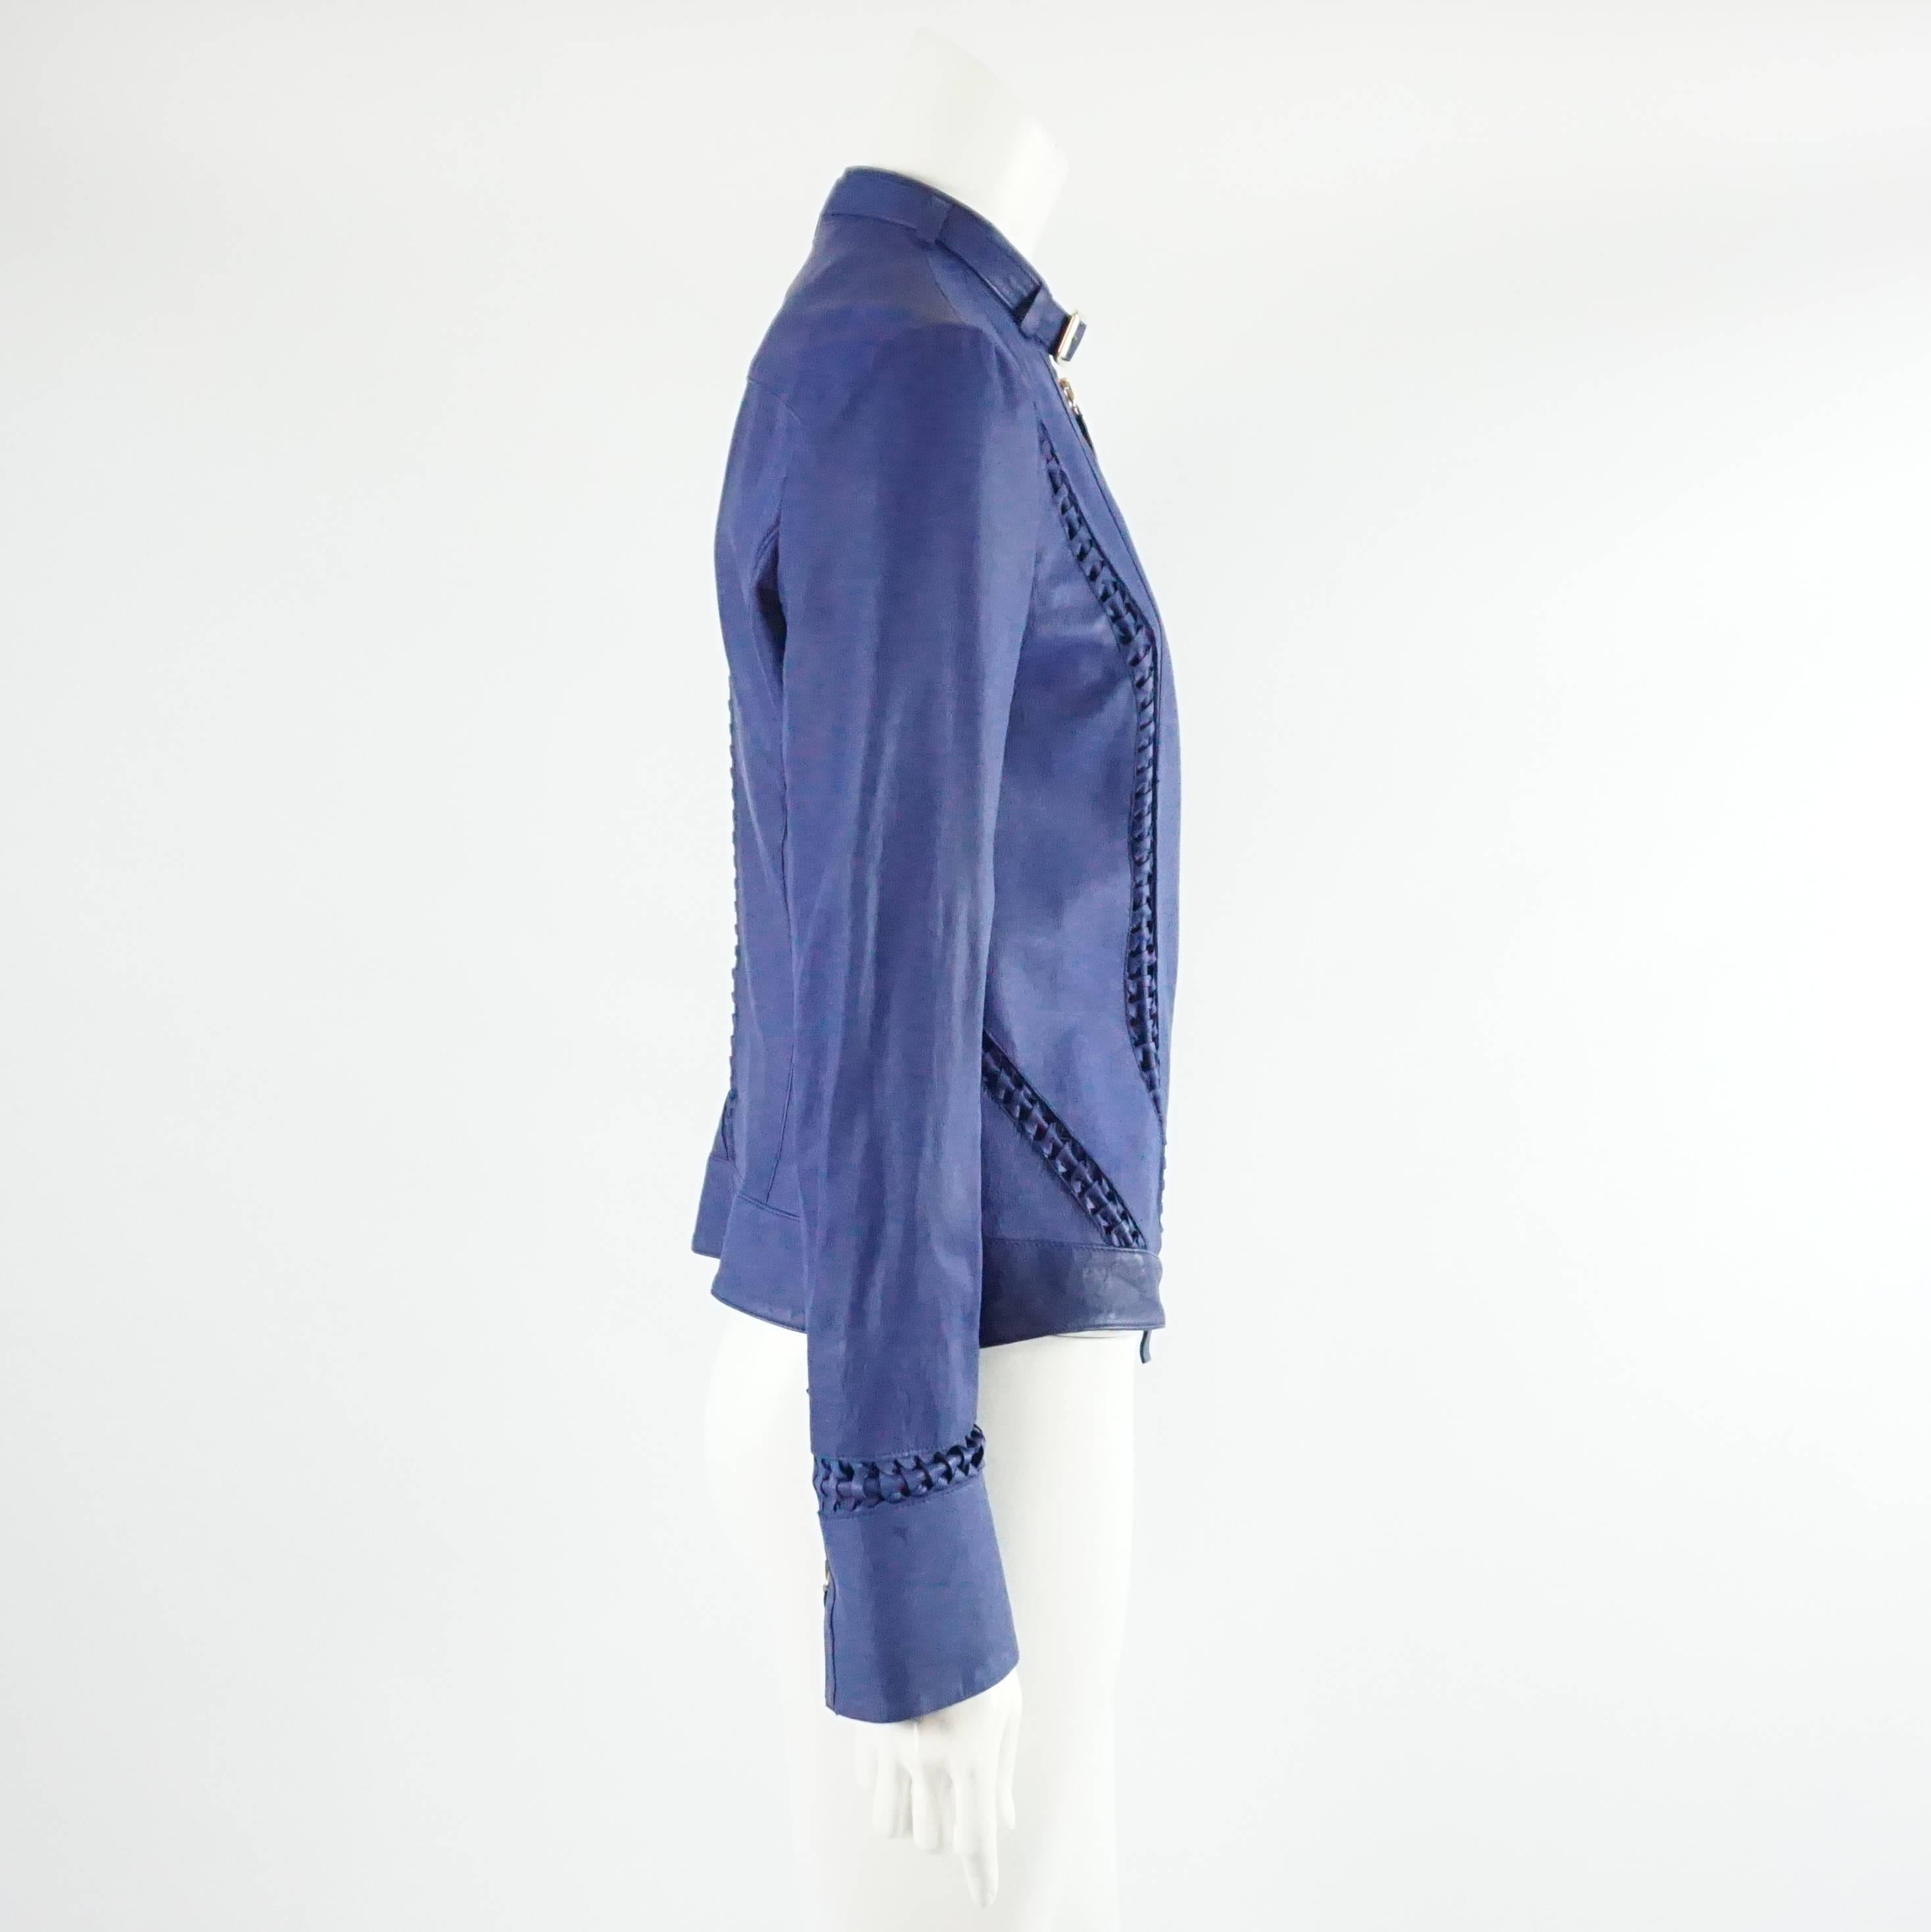 This Roberto Cavalli leather jacket is blue with a silver zipper (there are two zipper pulls) and buckle around the neck. On the back of the cuffs there is a zipper. The front, side, and back have braided detail. This jacket is in good condition